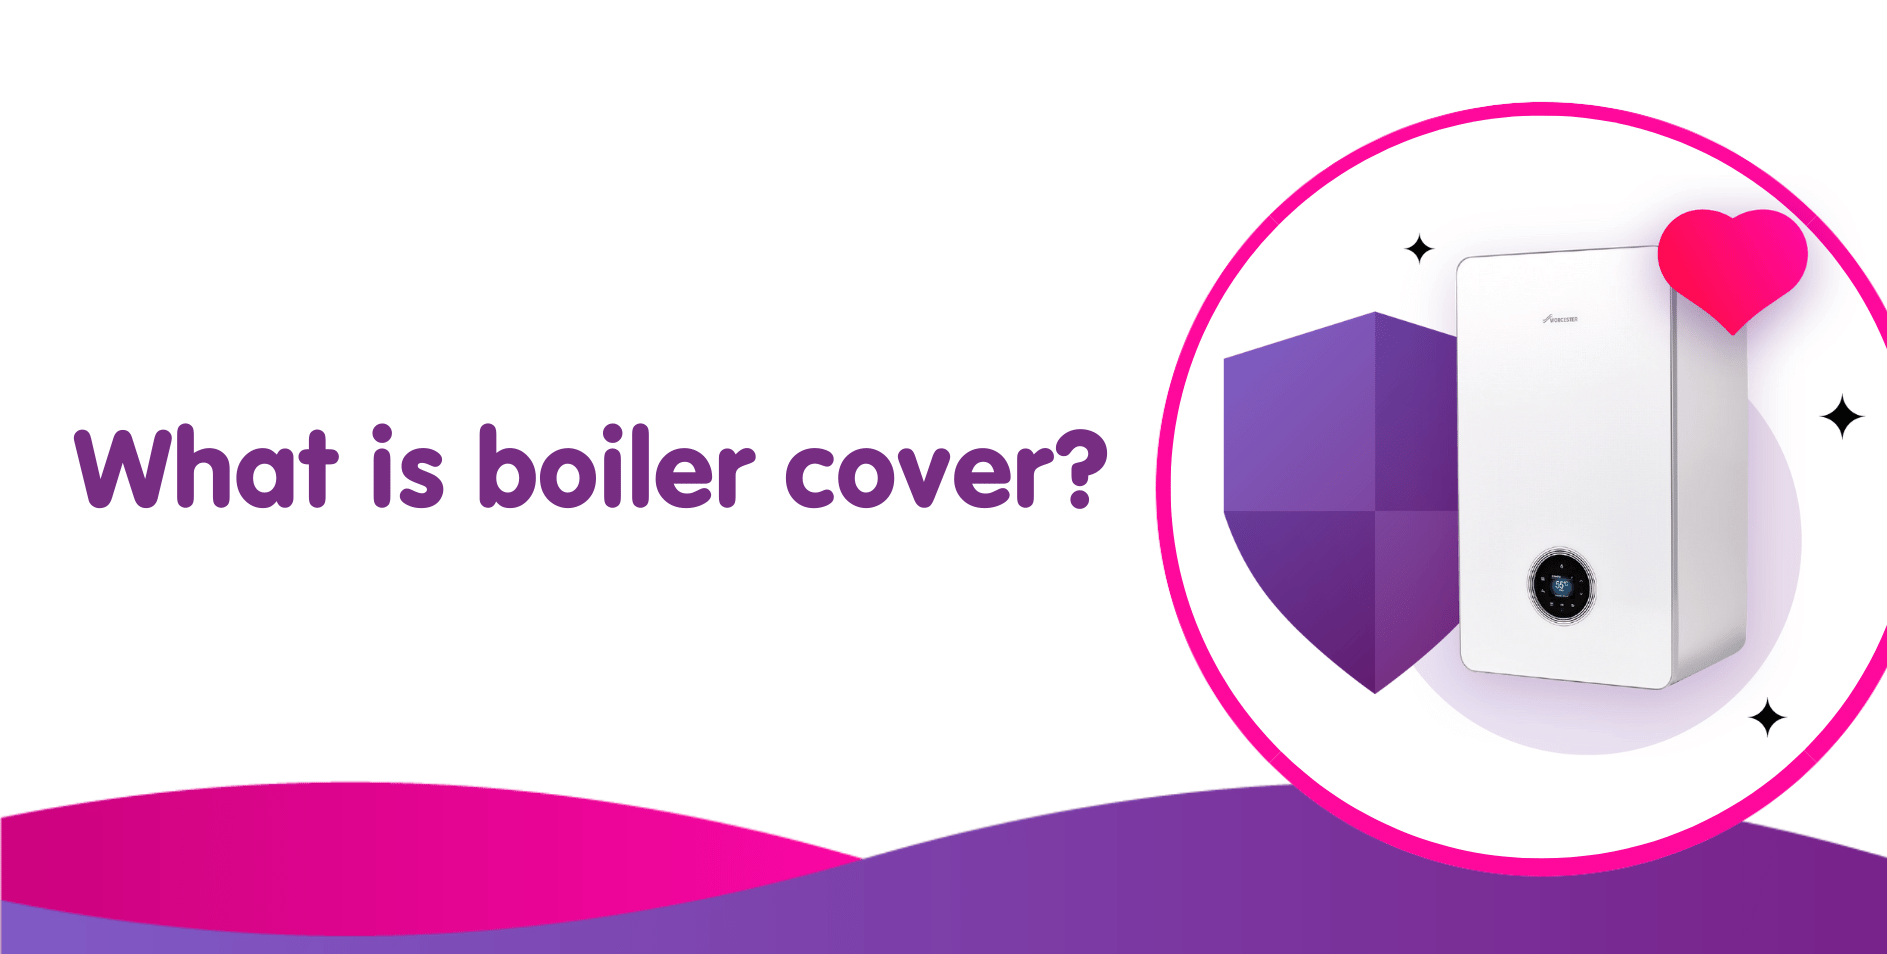 What is boiler cover?